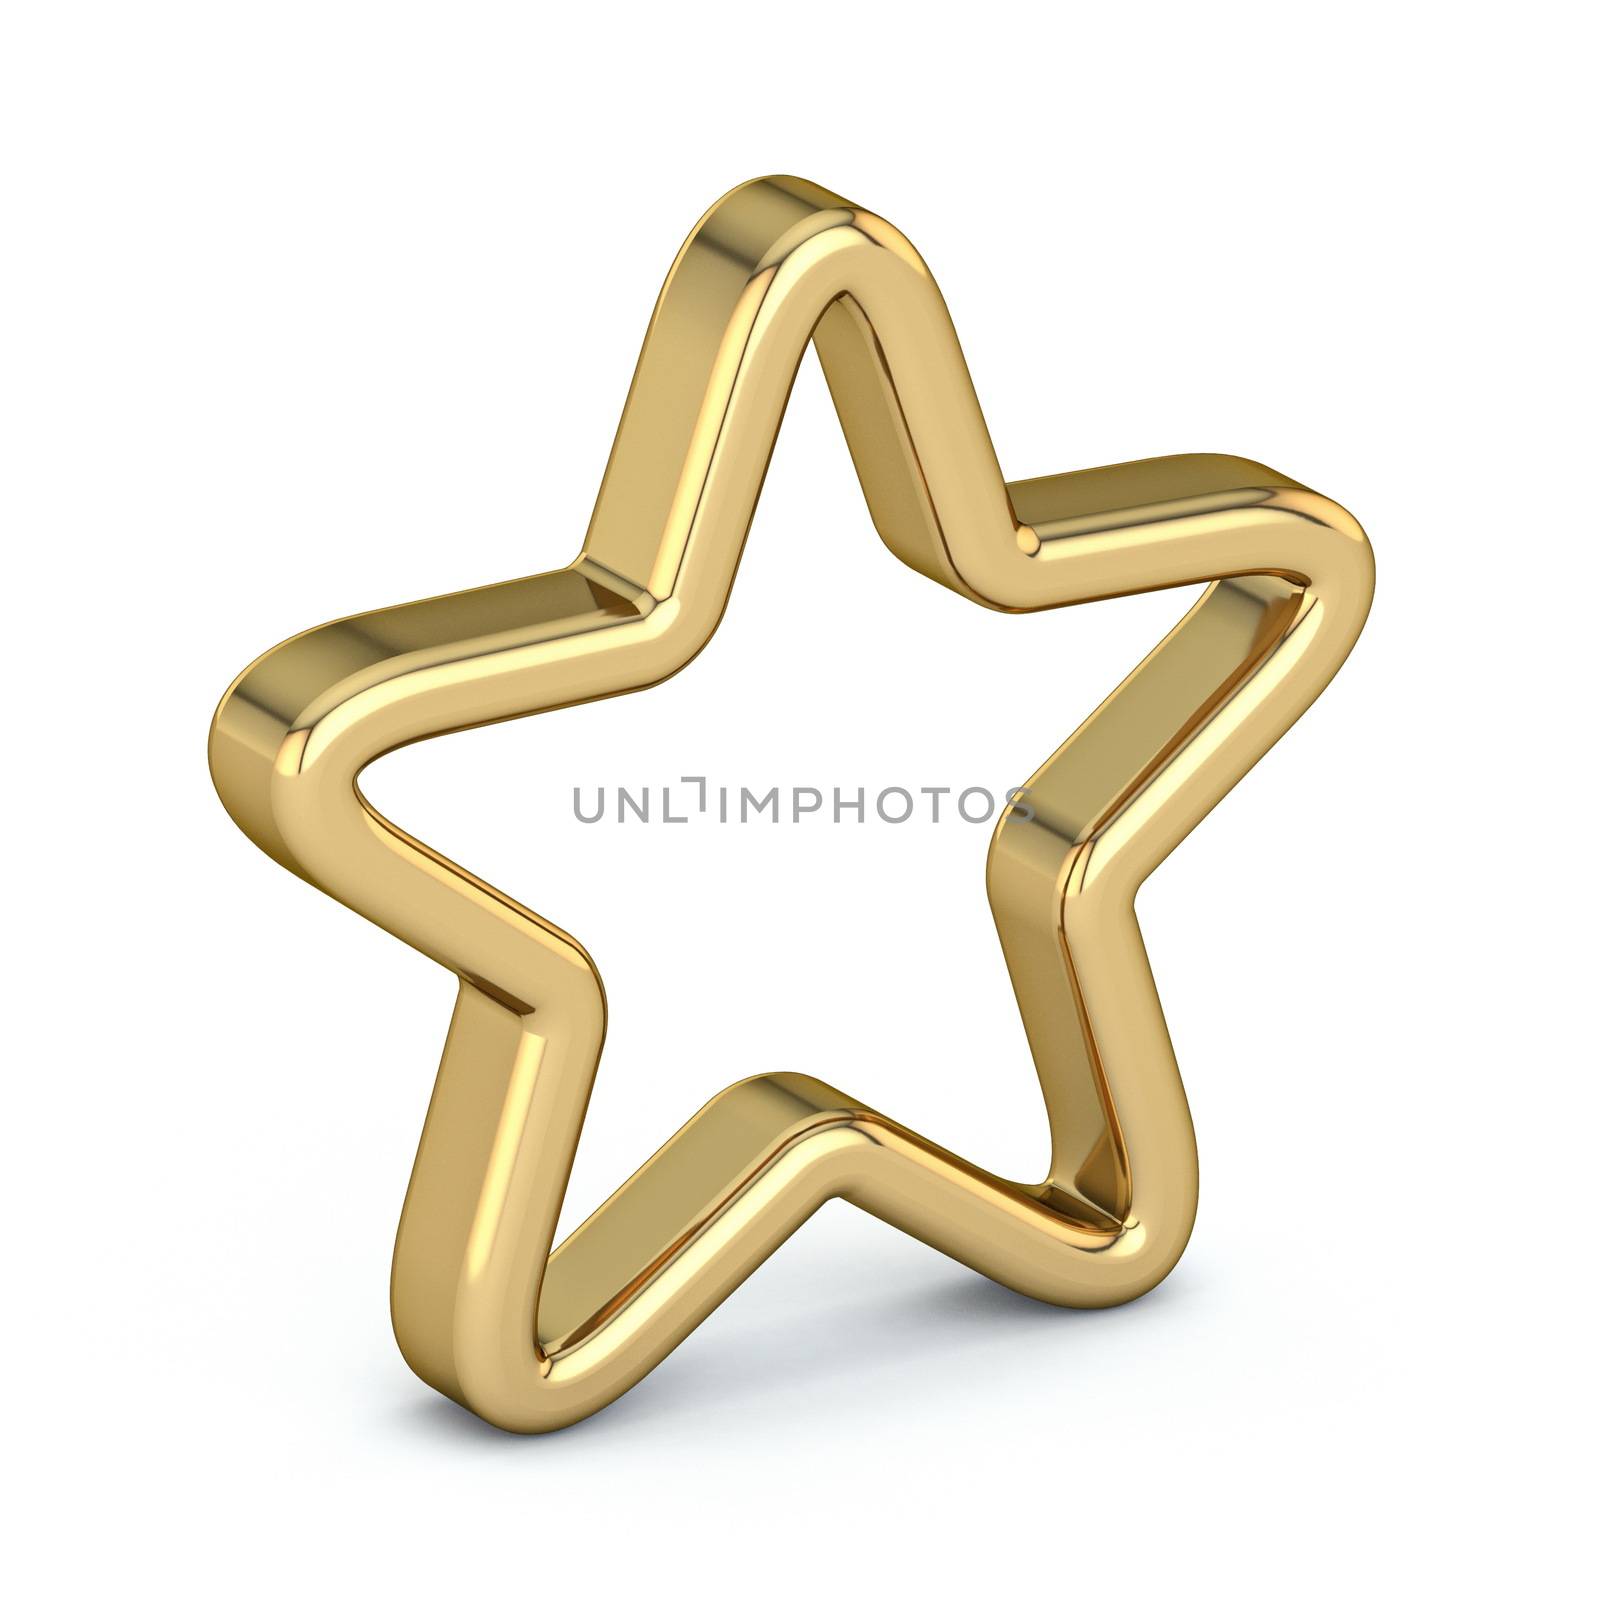 Golden star old, scratched, outlined 3D render illustration isolated on white background